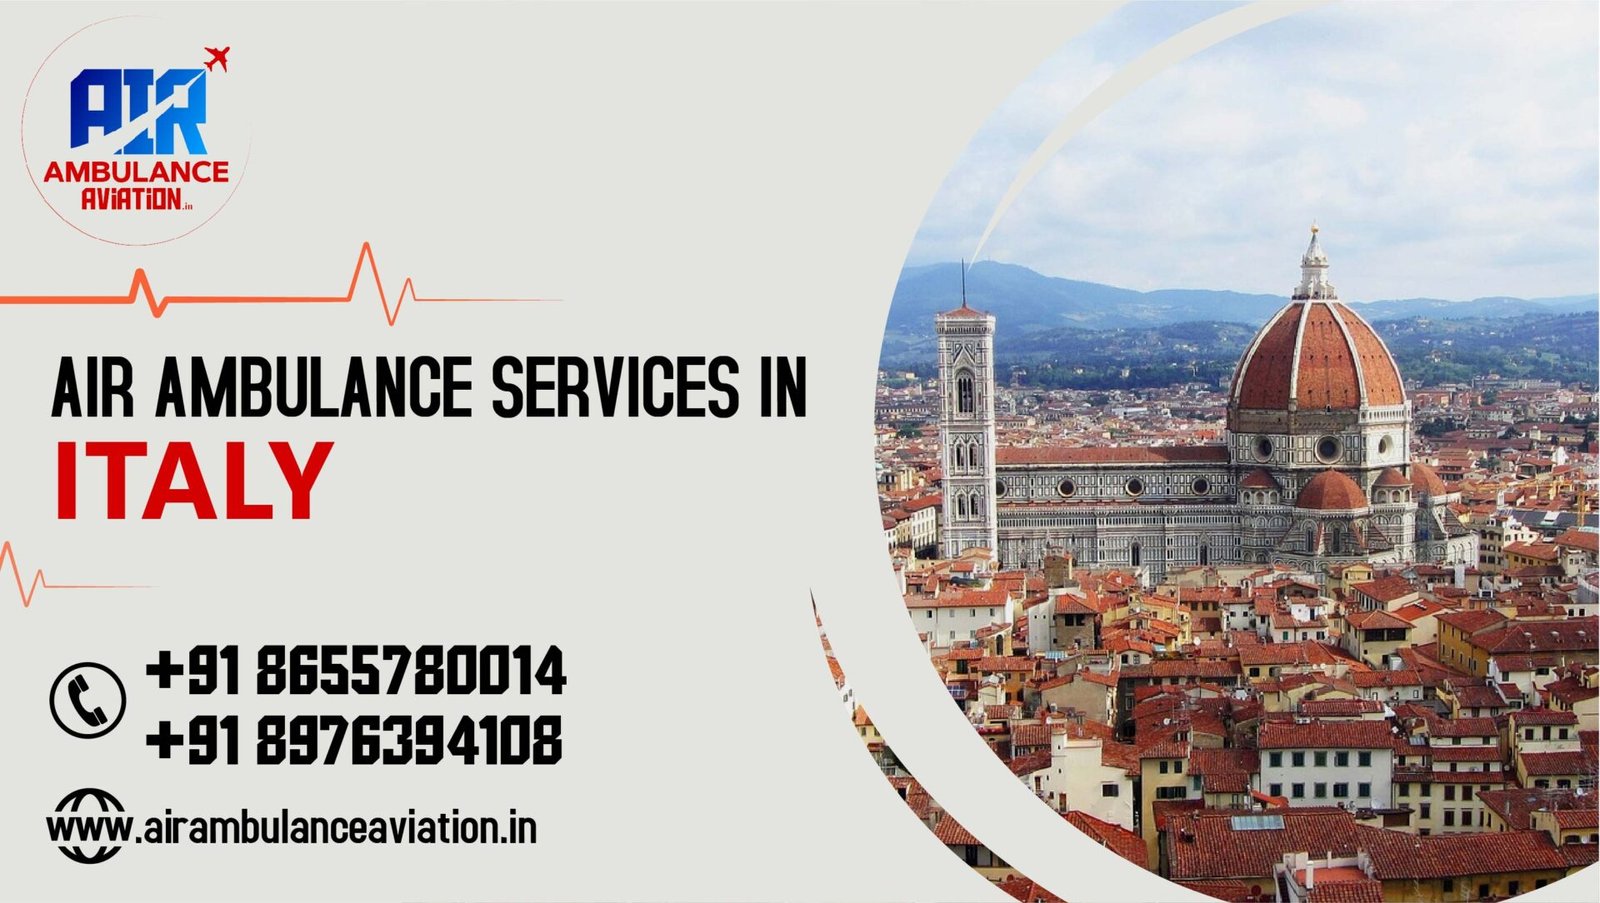 Air Ambulance Services in Italy